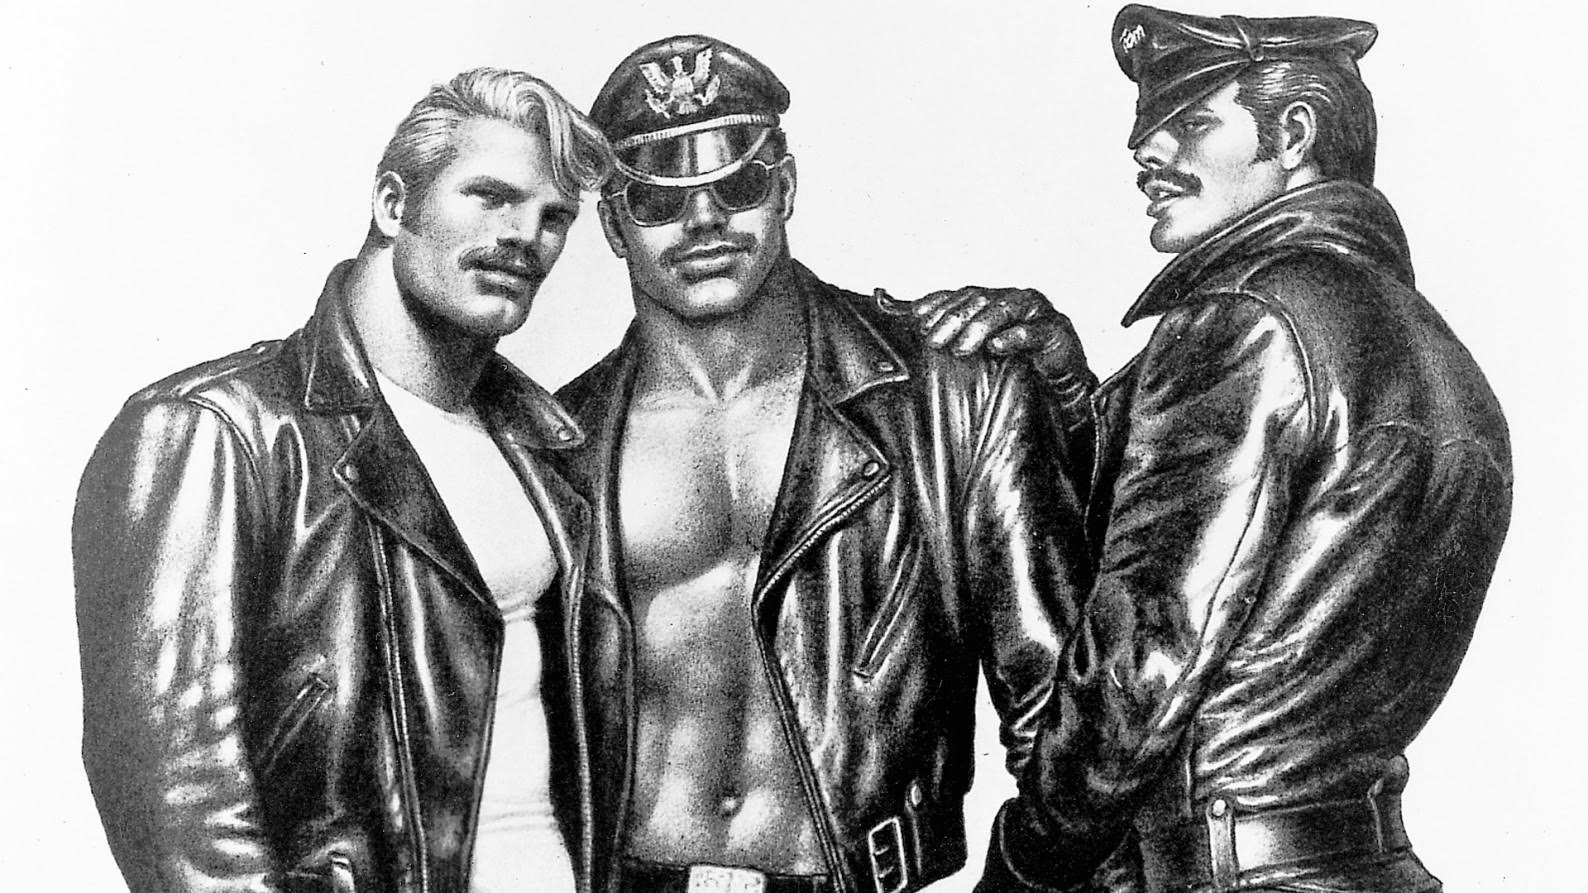 Tom of Finland The Art of Strong Gay Masculinity DailyArt Magazine